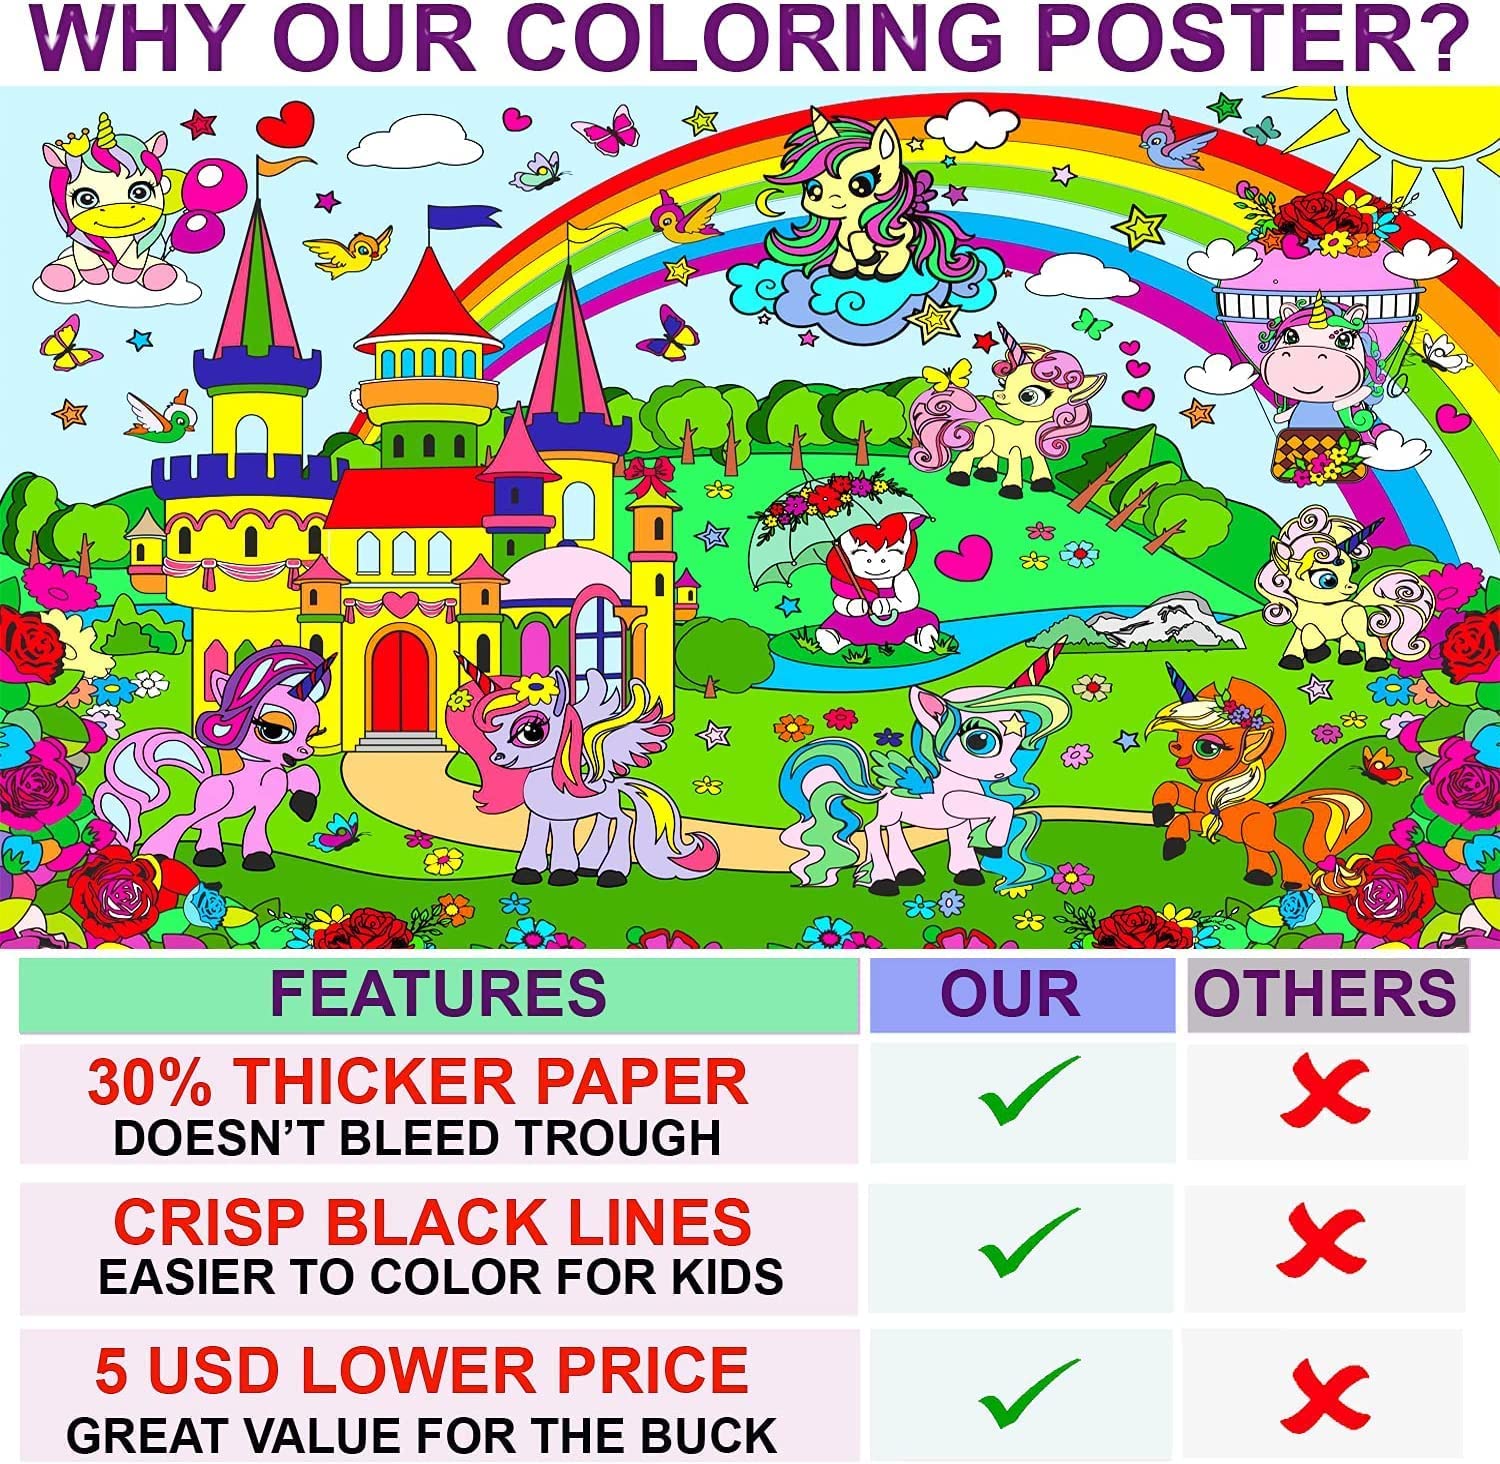 Coloring poster for children, palace and horses